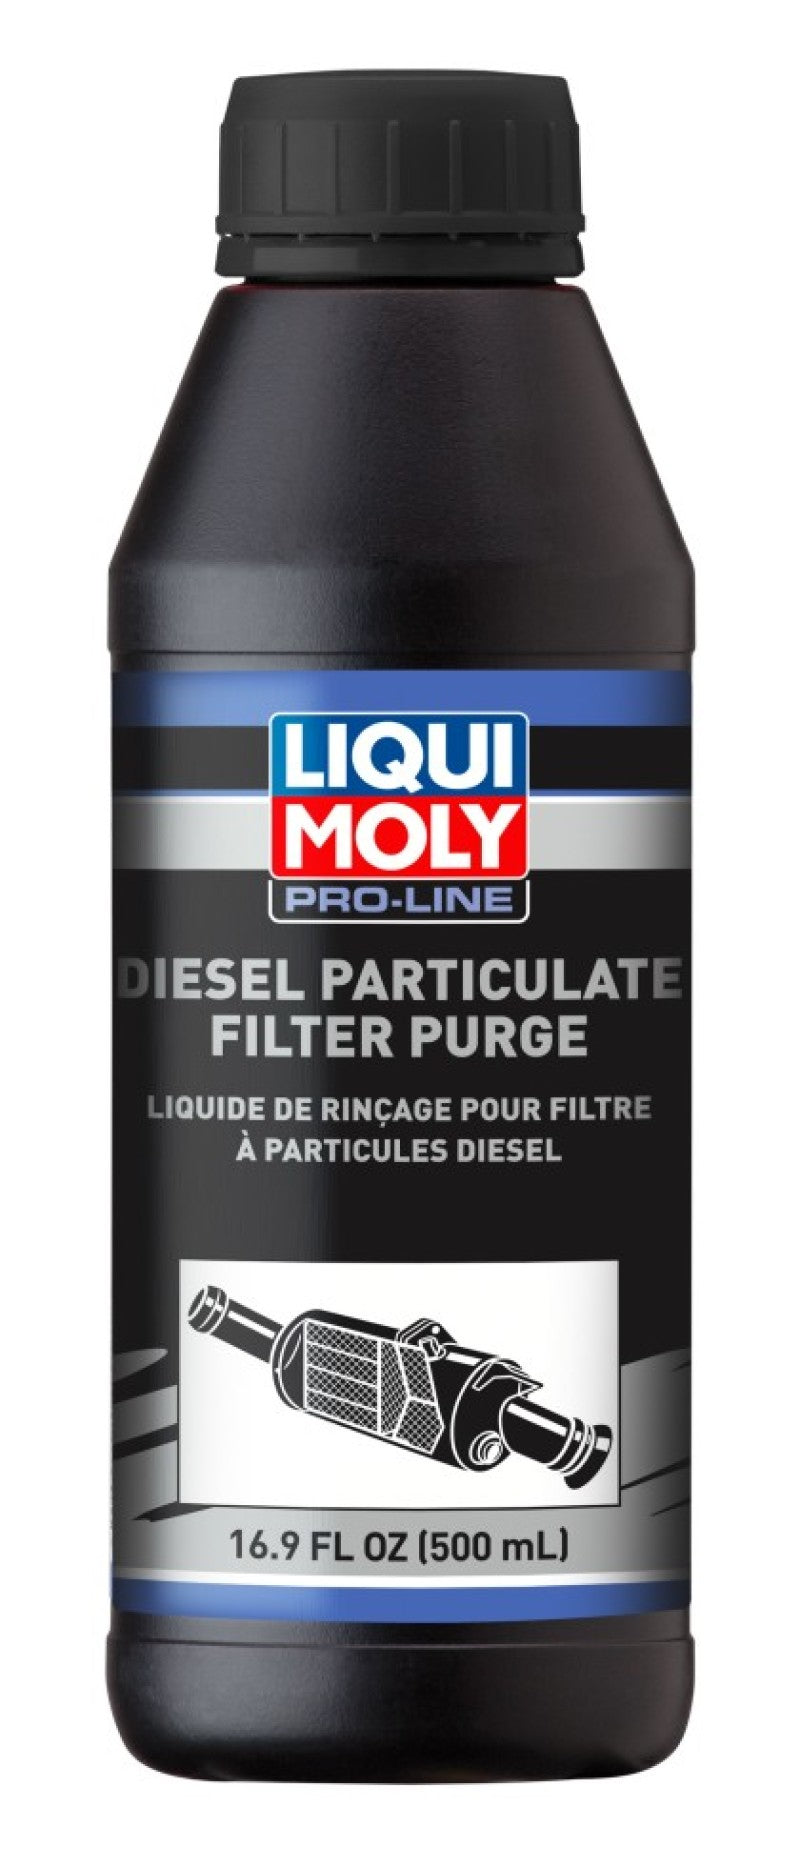 LIQUI MOLY 500mL Pro-Line Diesel Particulate Filter Purge - Single.